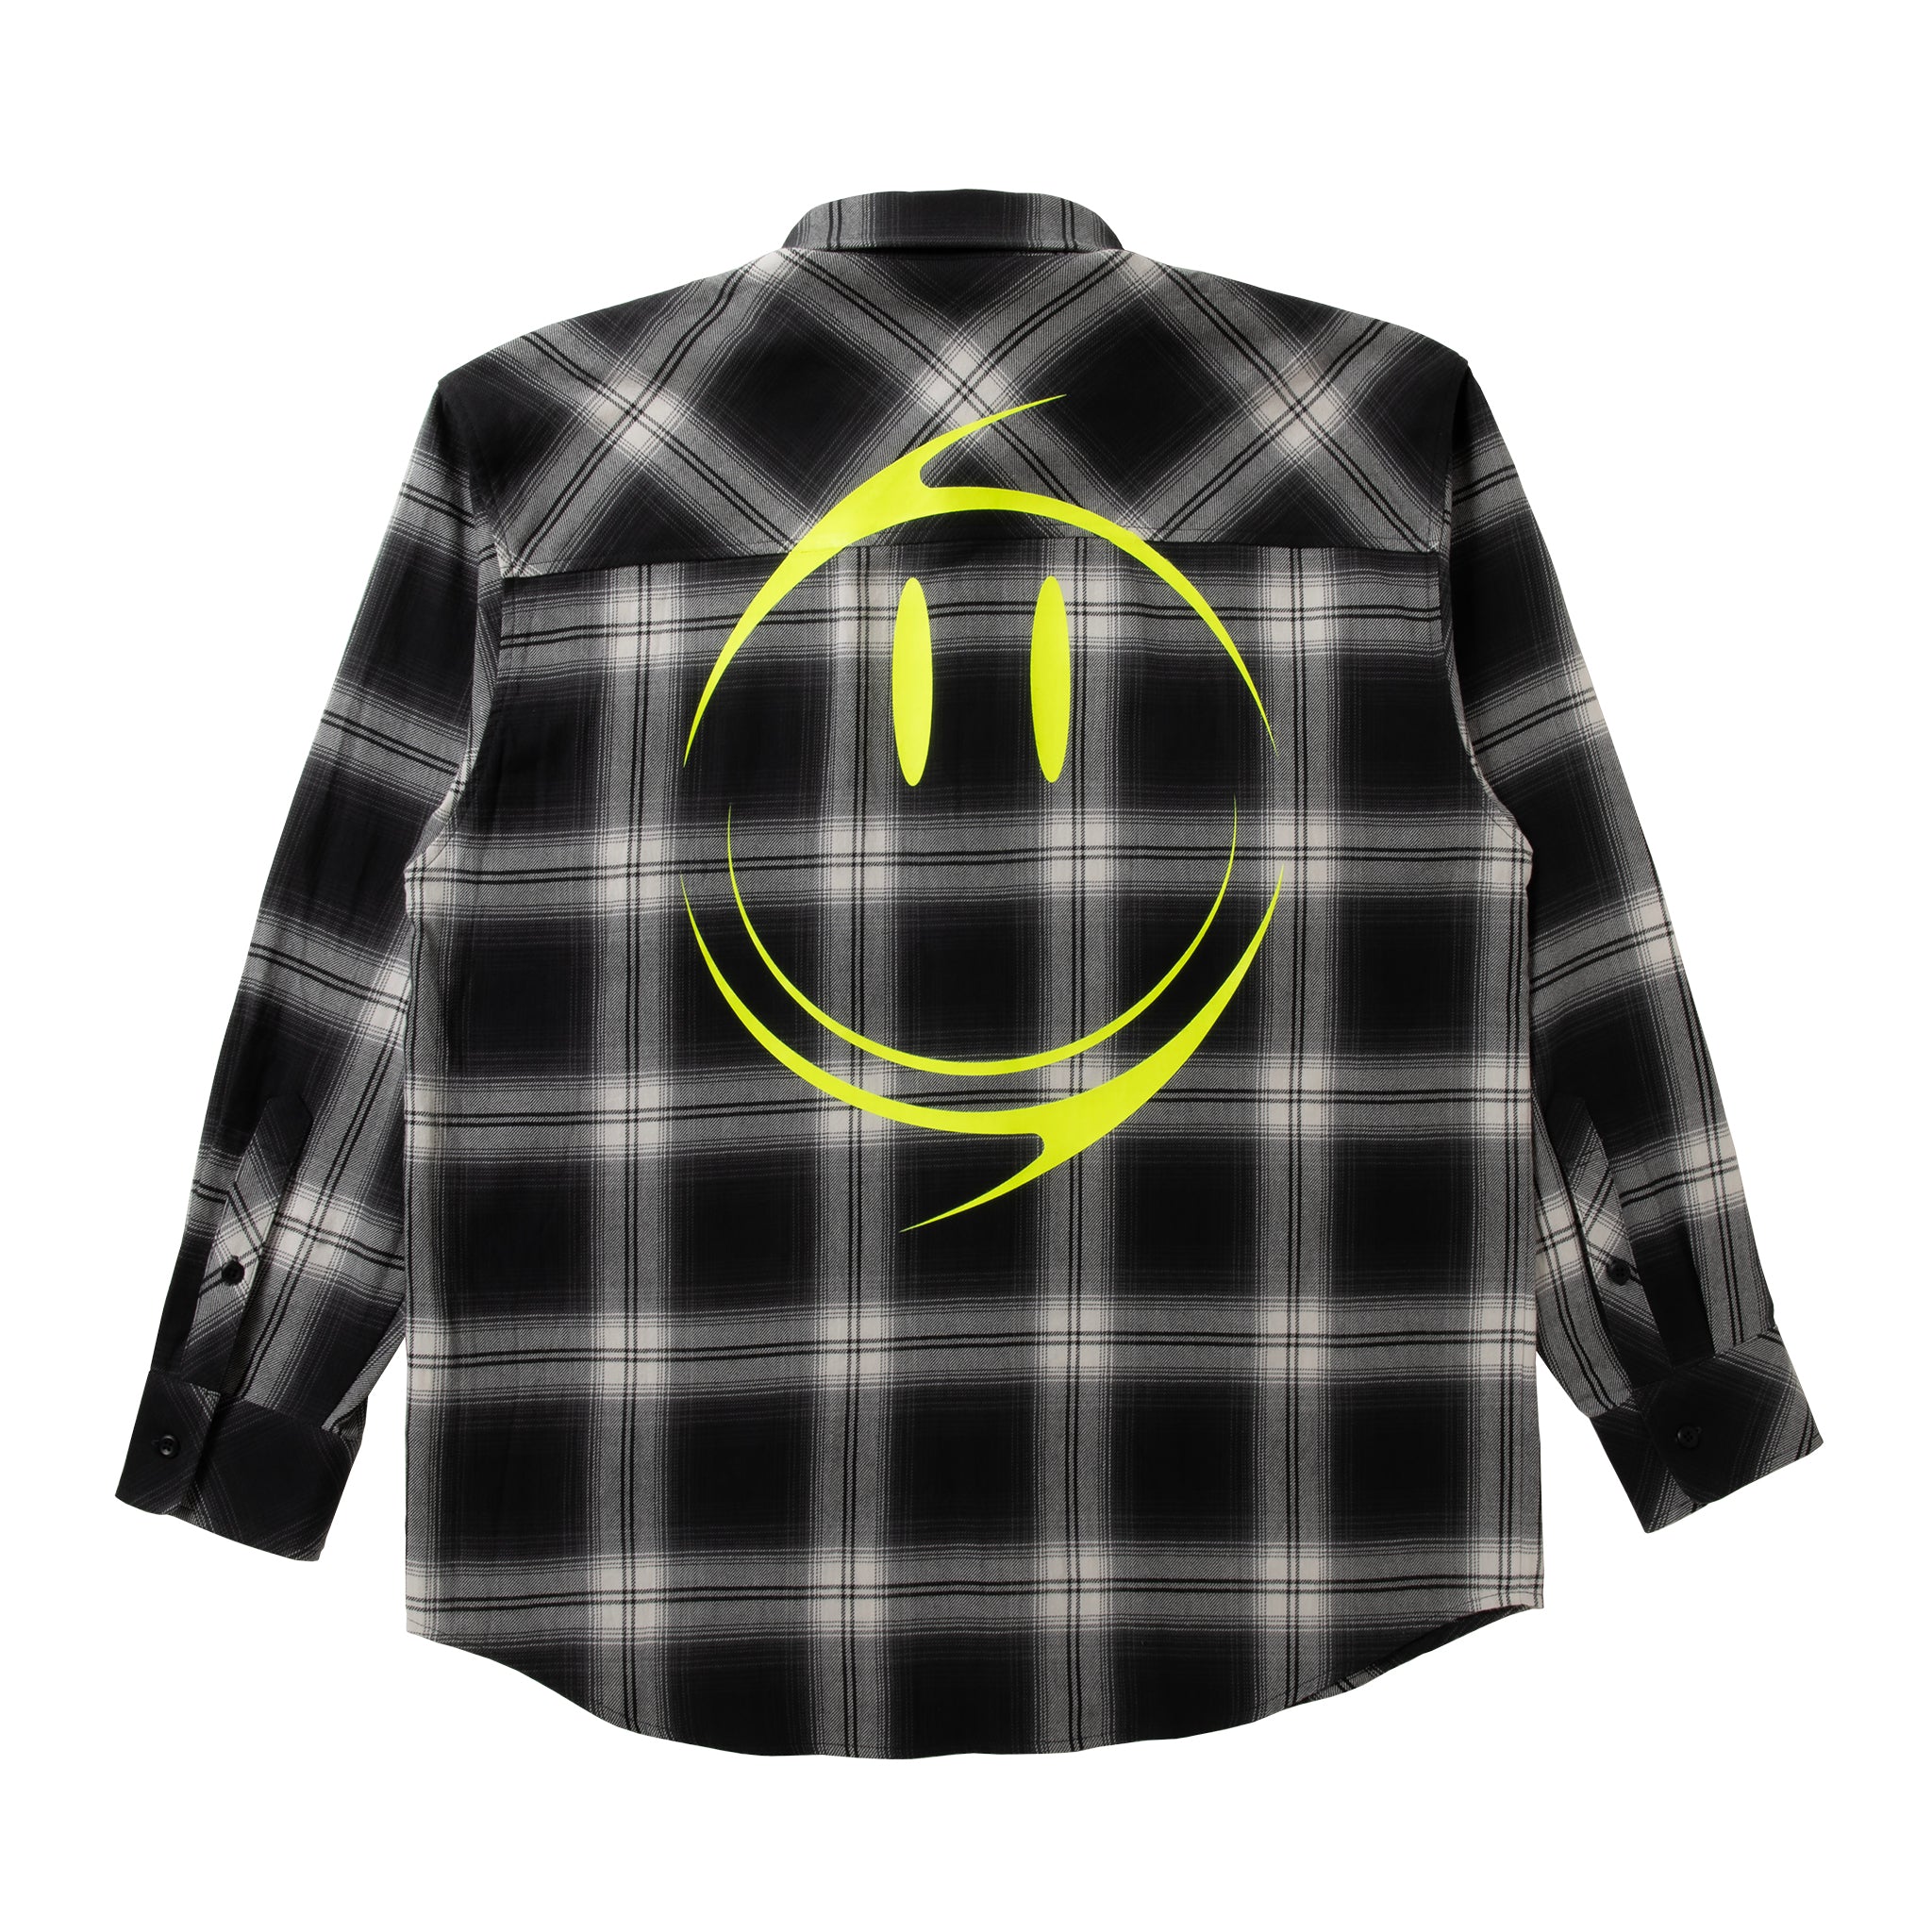 loosejoints≒RAFU - GUCCIMAZE - 'Joints' Fluo printed Flannel shirt (Black)